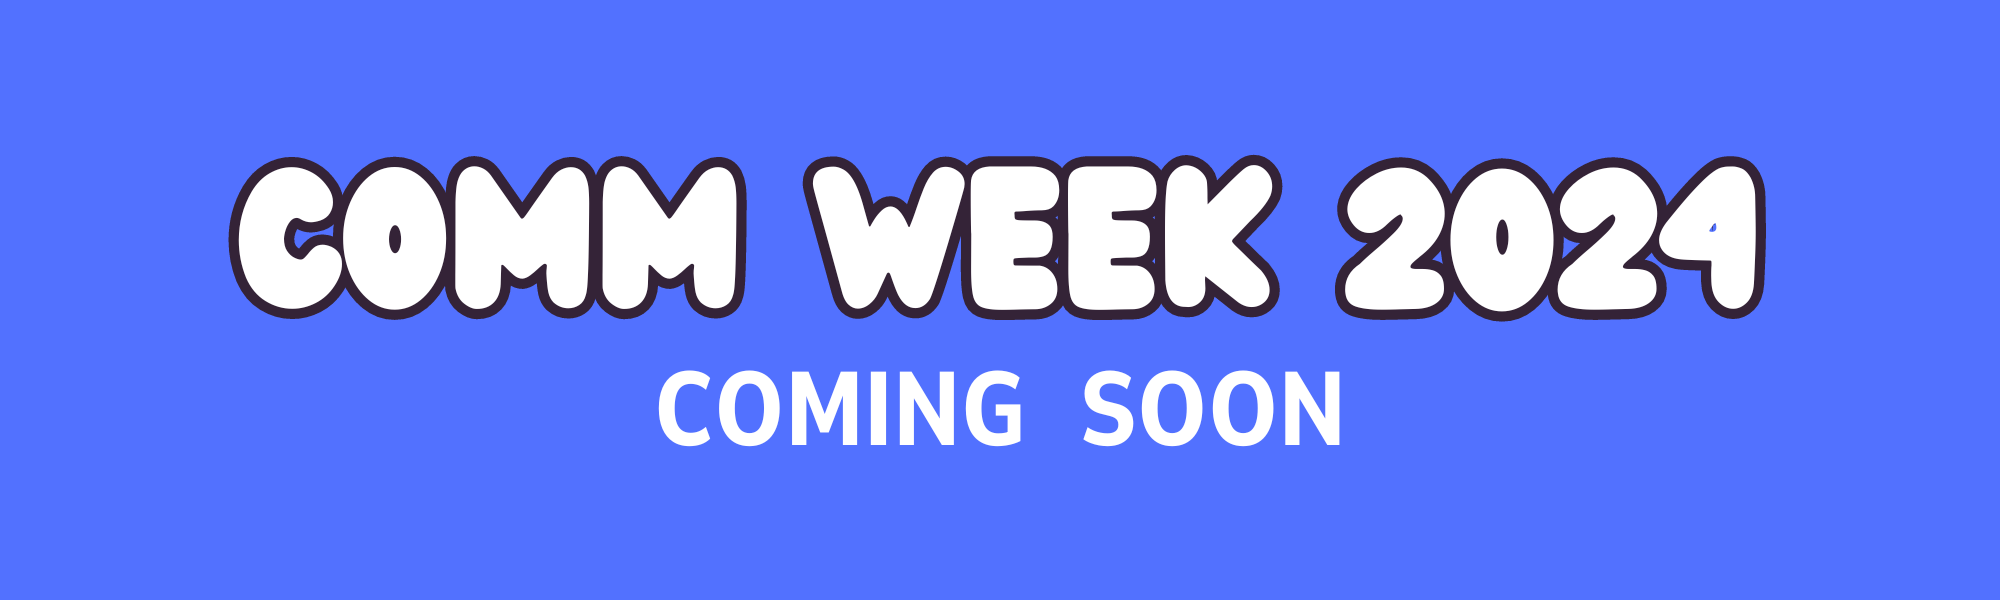 Blue banner that reads COMM WEEK 2024 coming soon